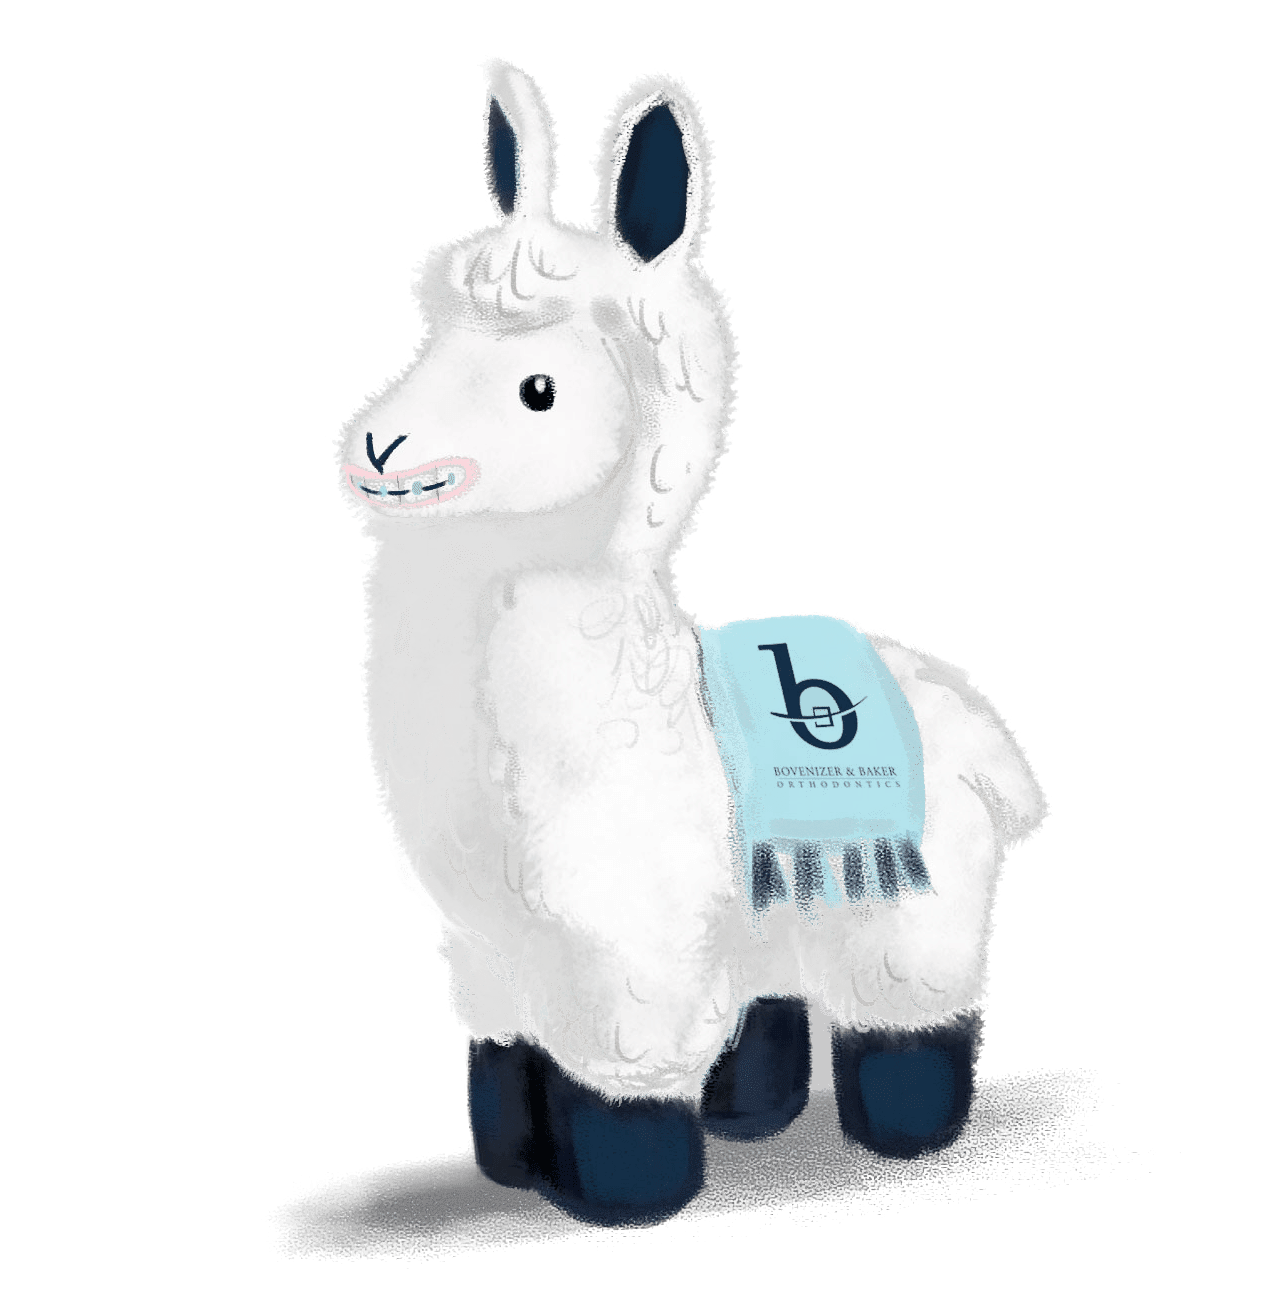 A drawing of a llama with braces on and a blue blanket that says